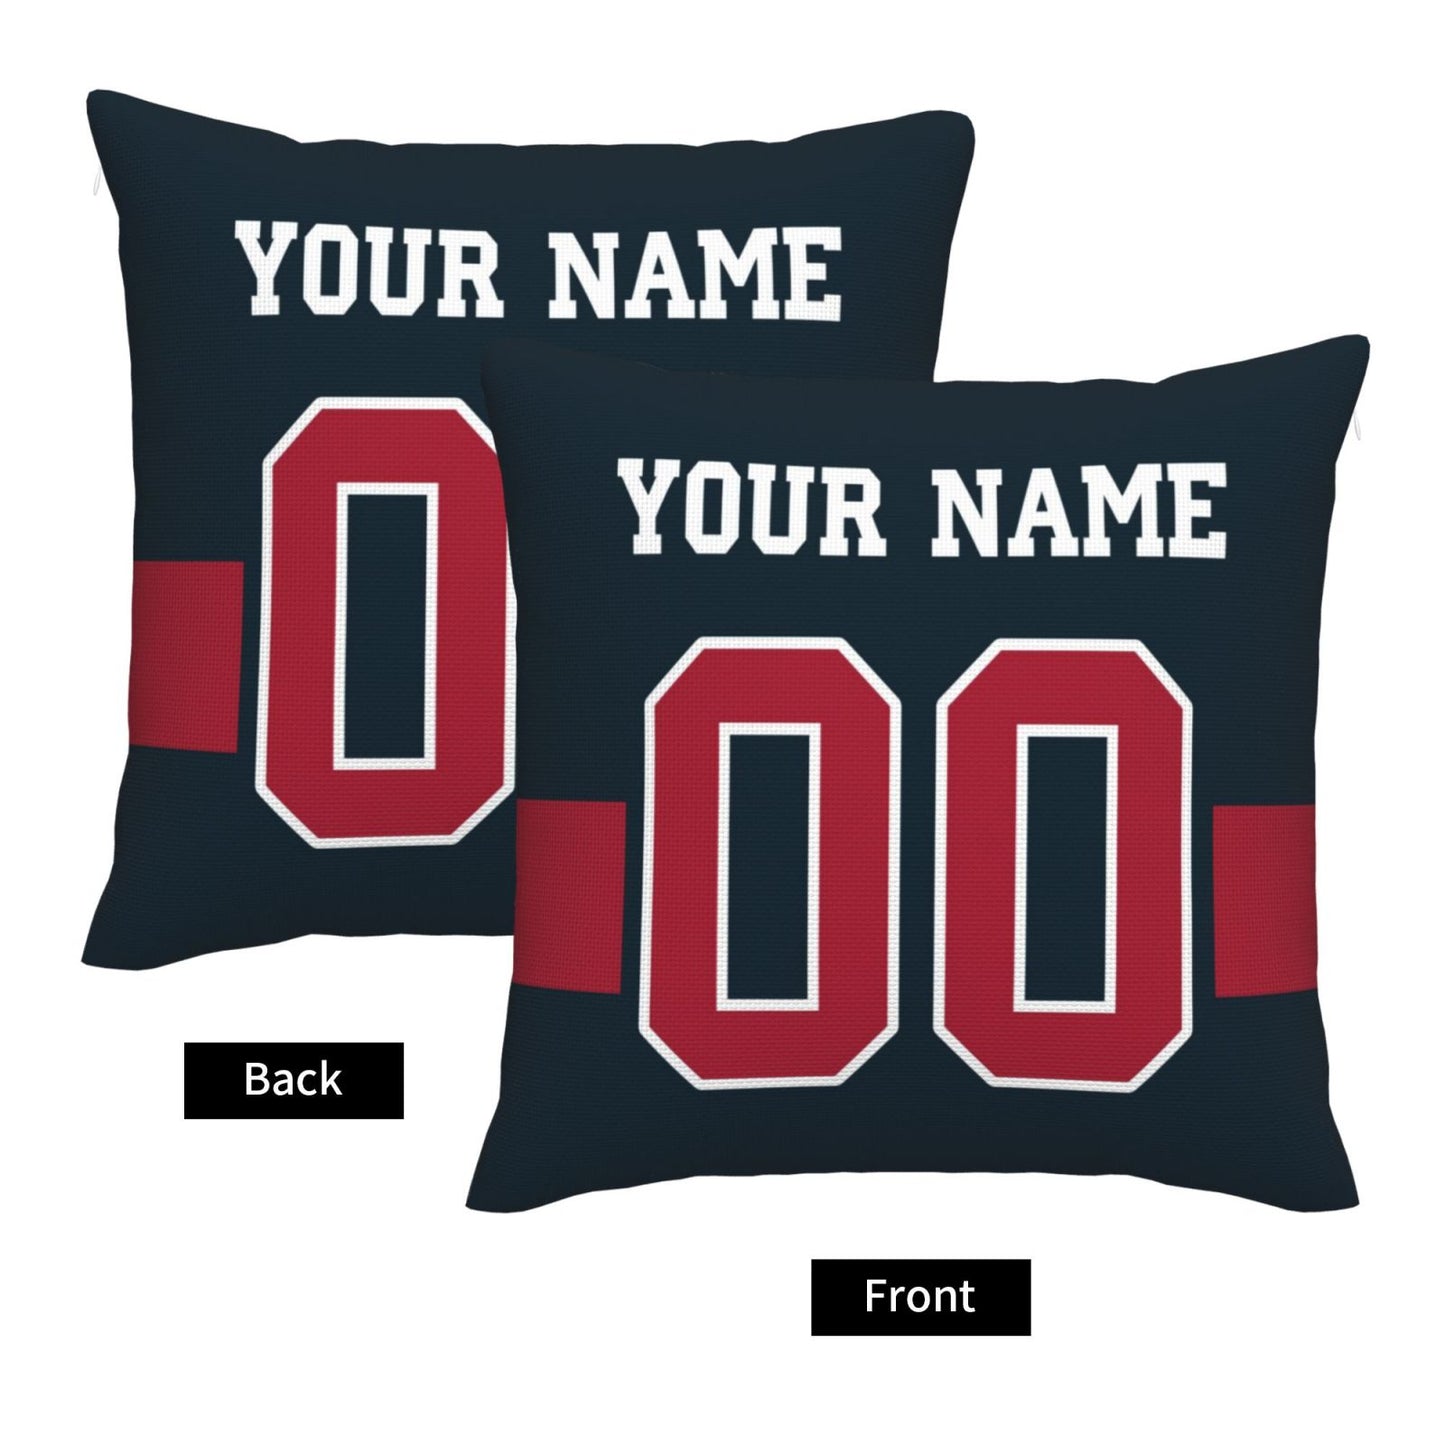 Customized Houston Texans Football Team Decorative Throw Pillow Case Print Personalized Football Style Fans Letters & Number Navy Pillowcase Birthday Gift